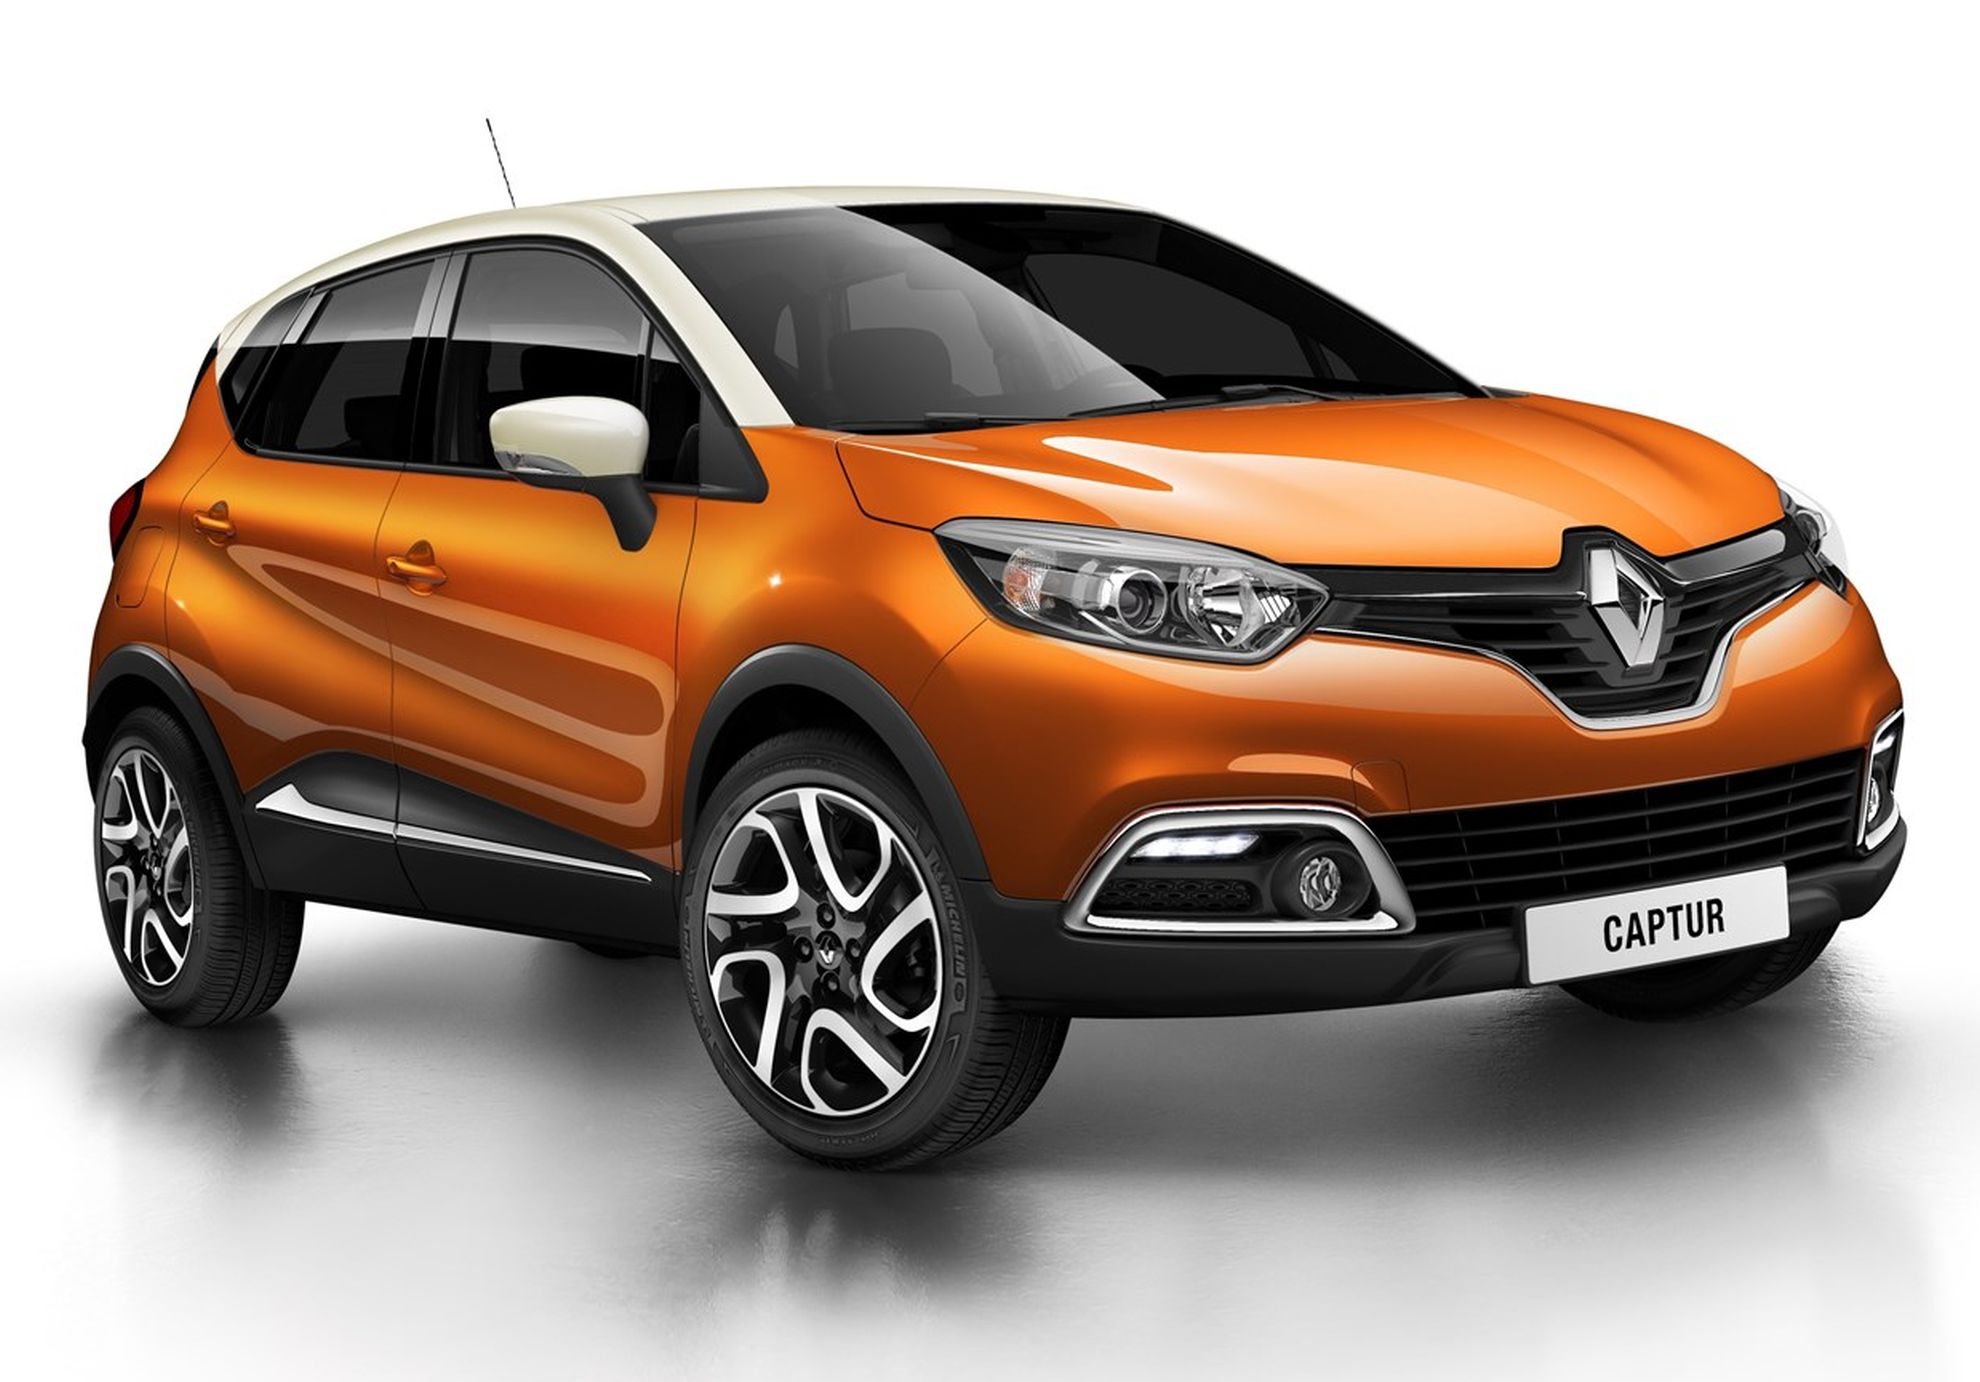 Renault geared to CAPTUR the crossover market in South Africa